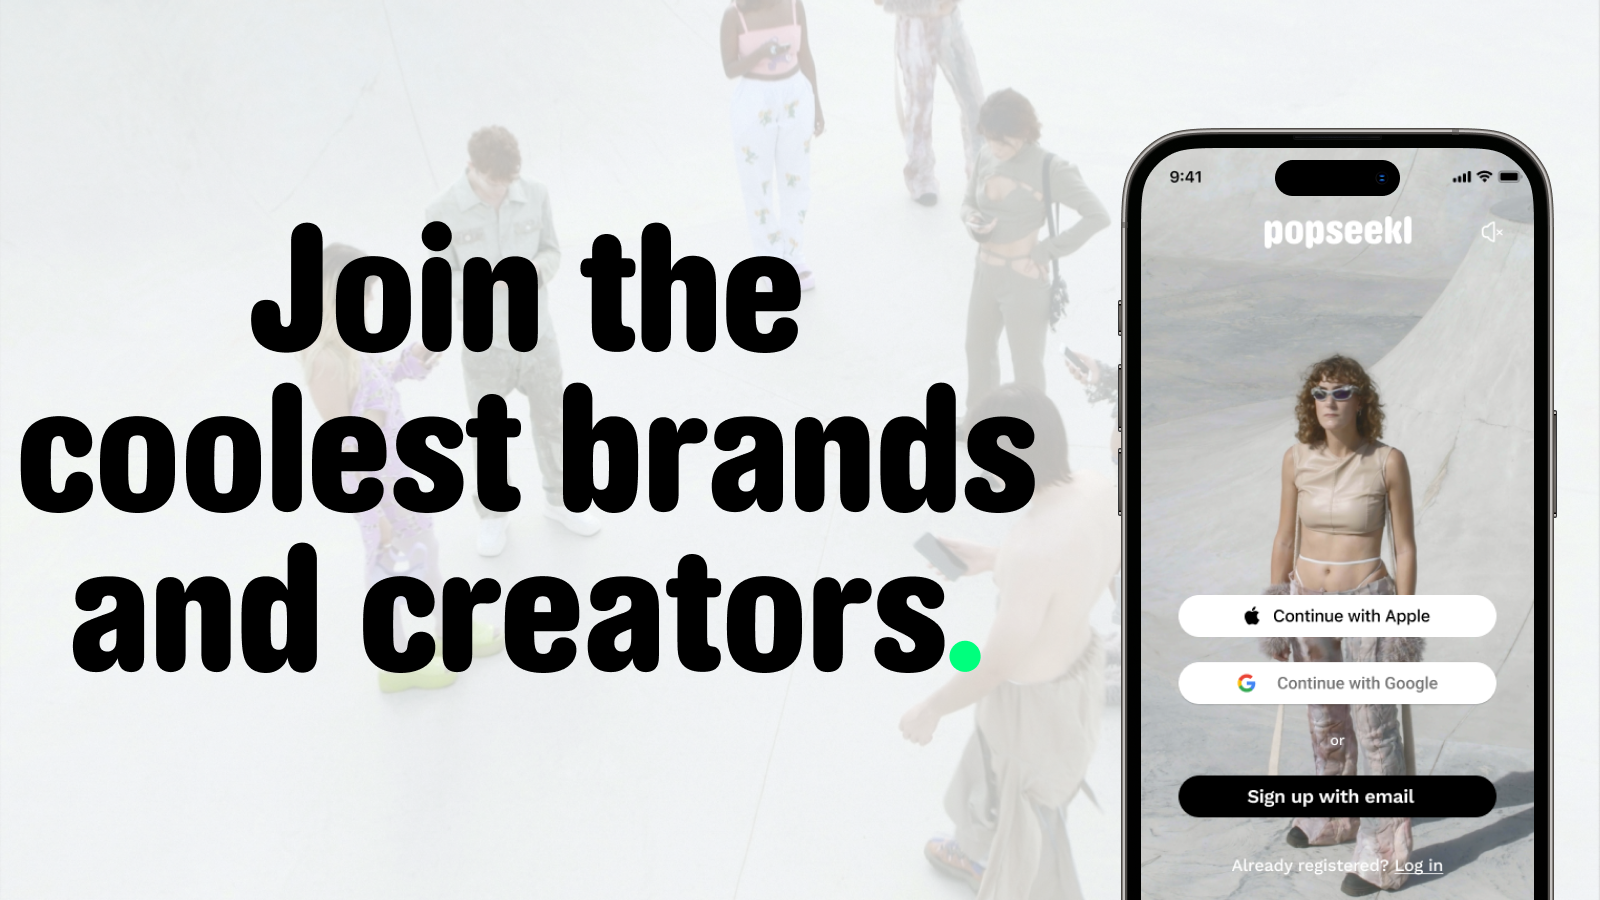 Join the coolest brands and creators